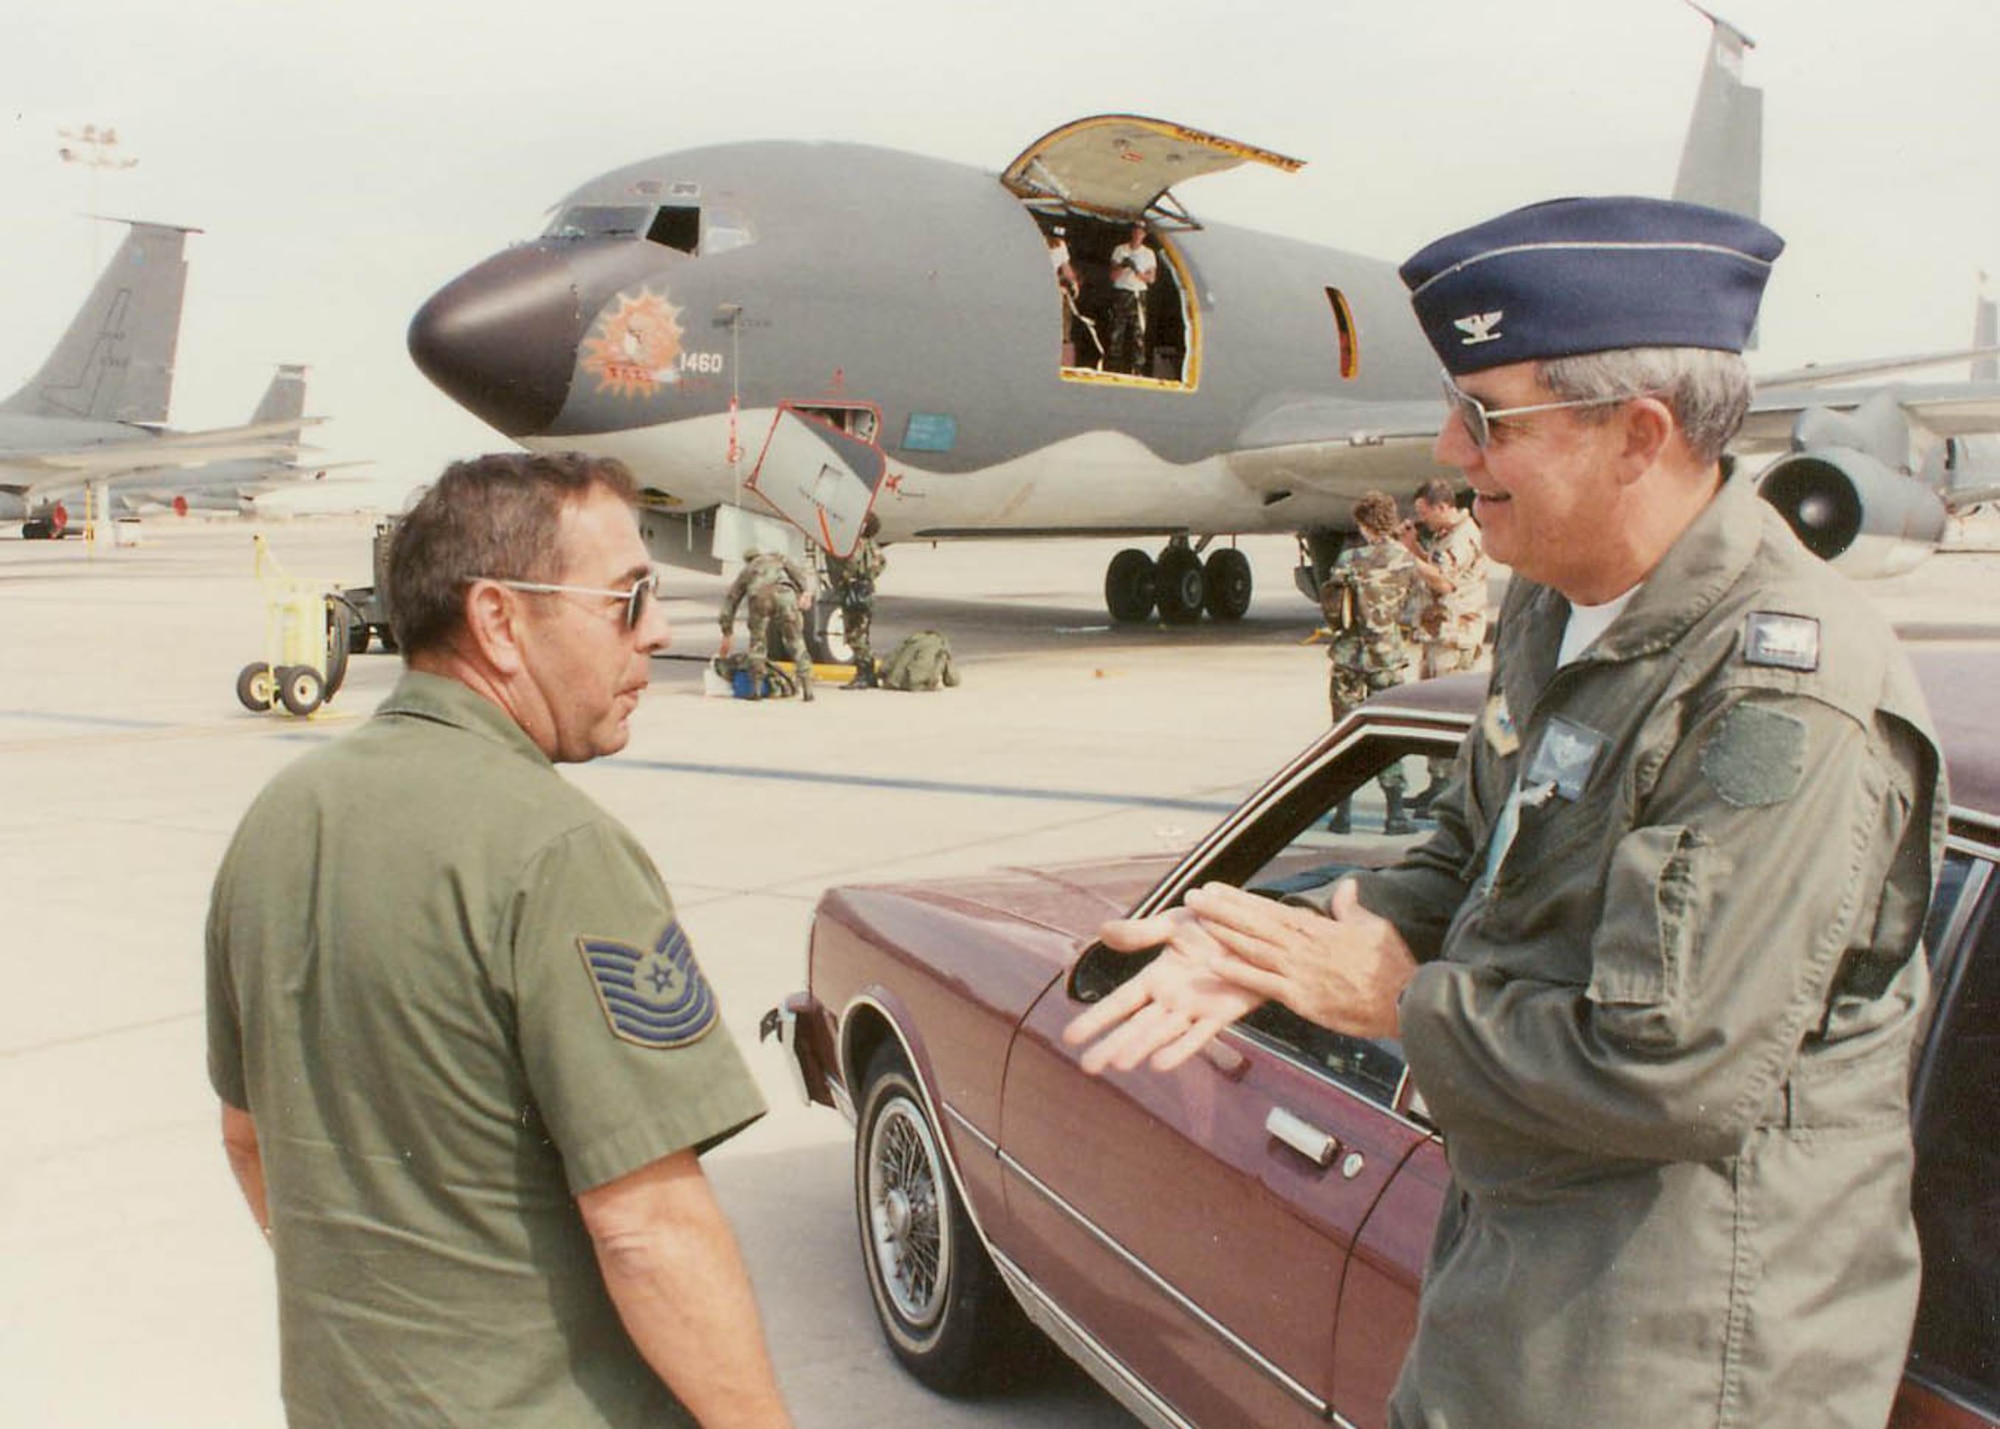 Col. Charles “Mick” Baier (right) chats with a 190th member and awaits the arrival of additional unit members to Prince Abdullah Air Base.